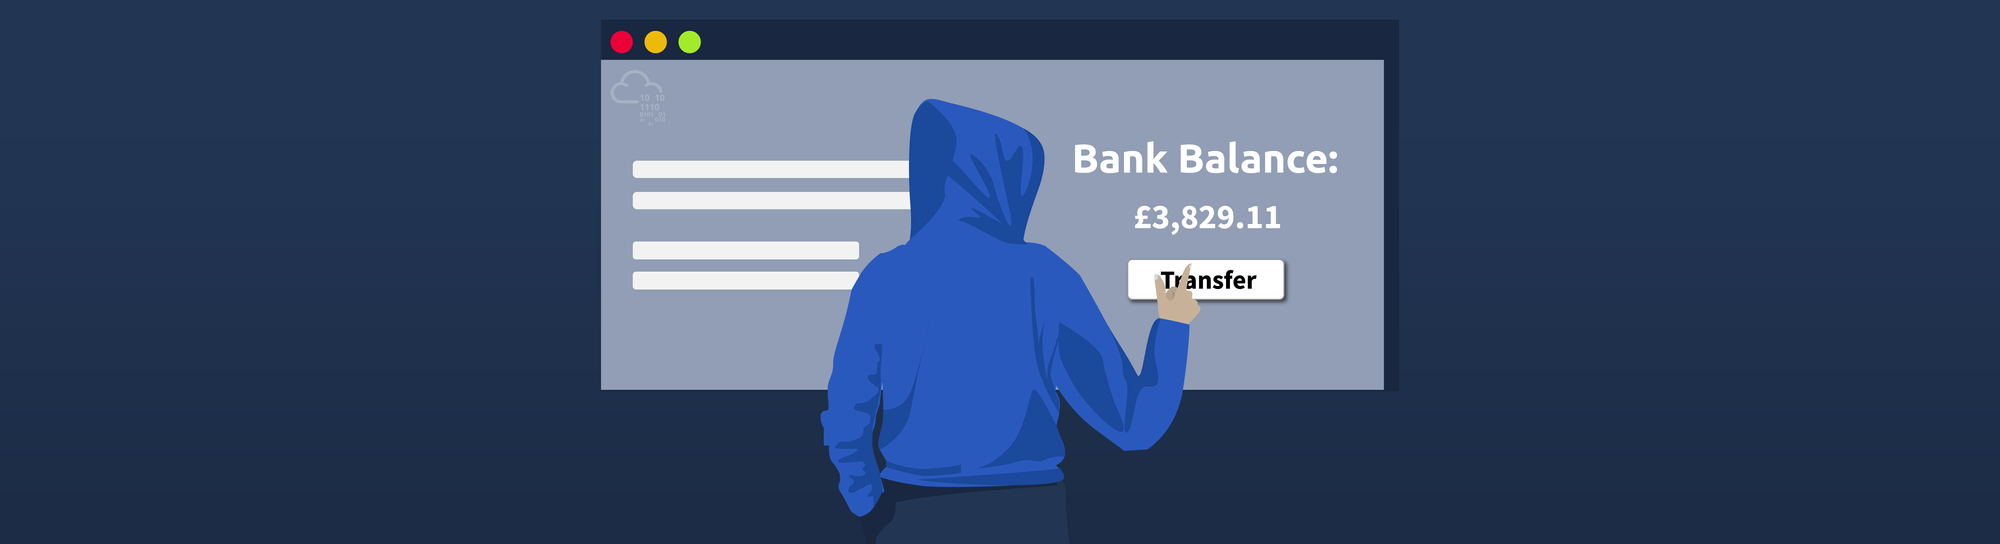 Hacker attempting to transfer funds from a bank